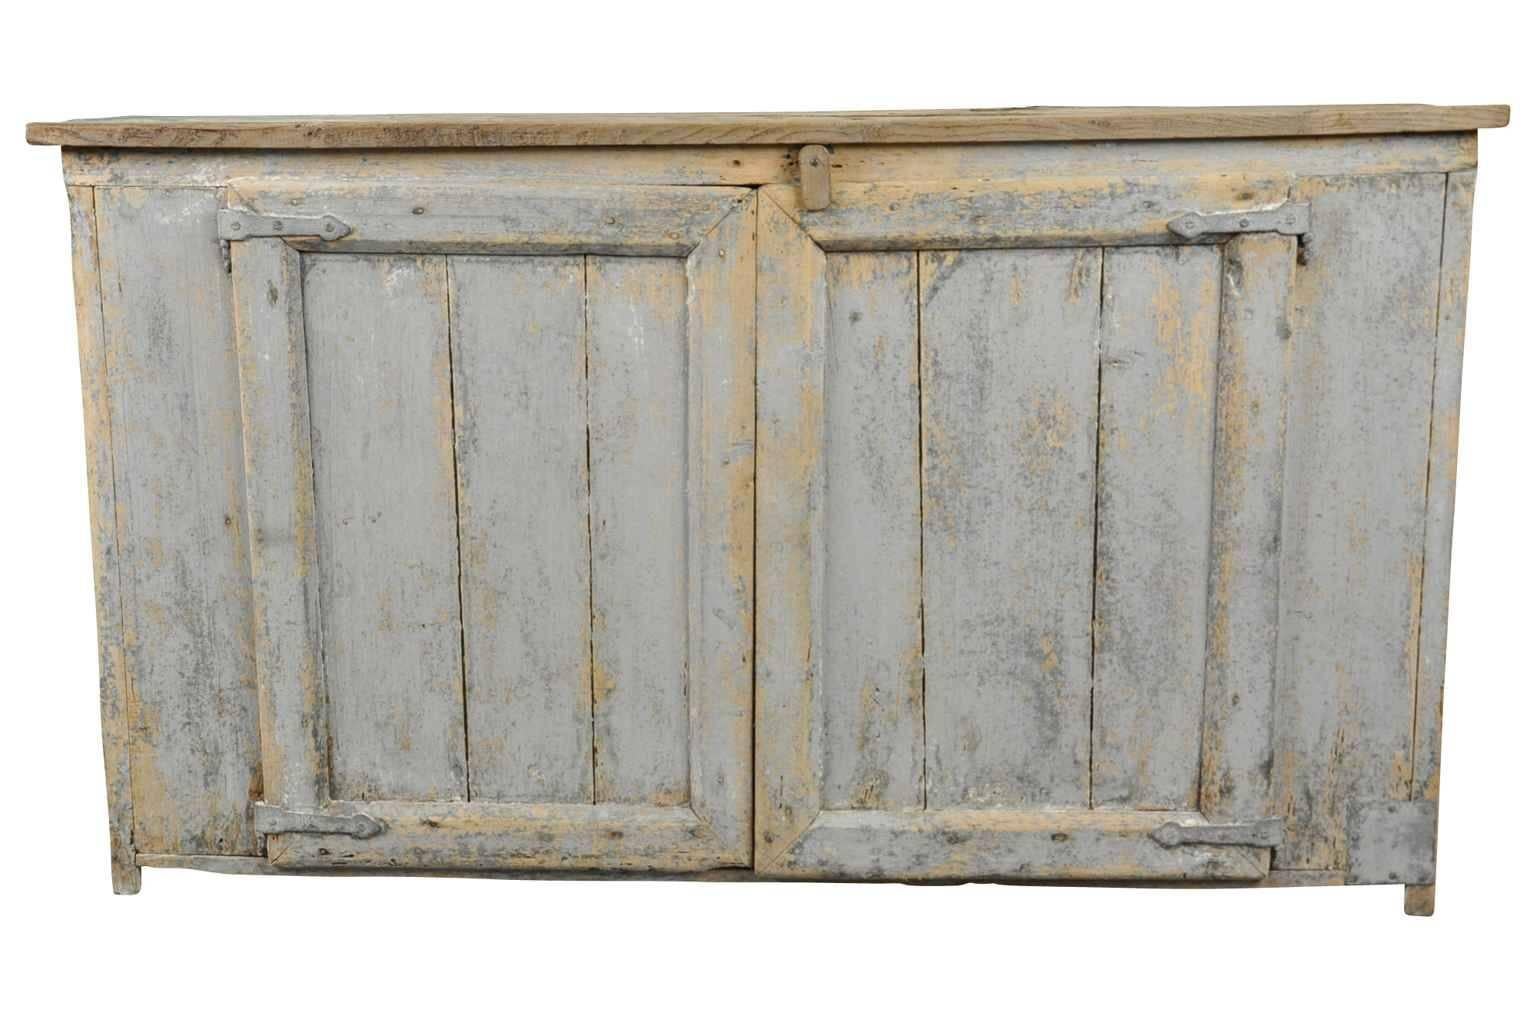 An 18th century French Primitive buffet in painted wood from the South of France. Wonderful painted finish in soft hues of powdery blue. Nice narrow depth.